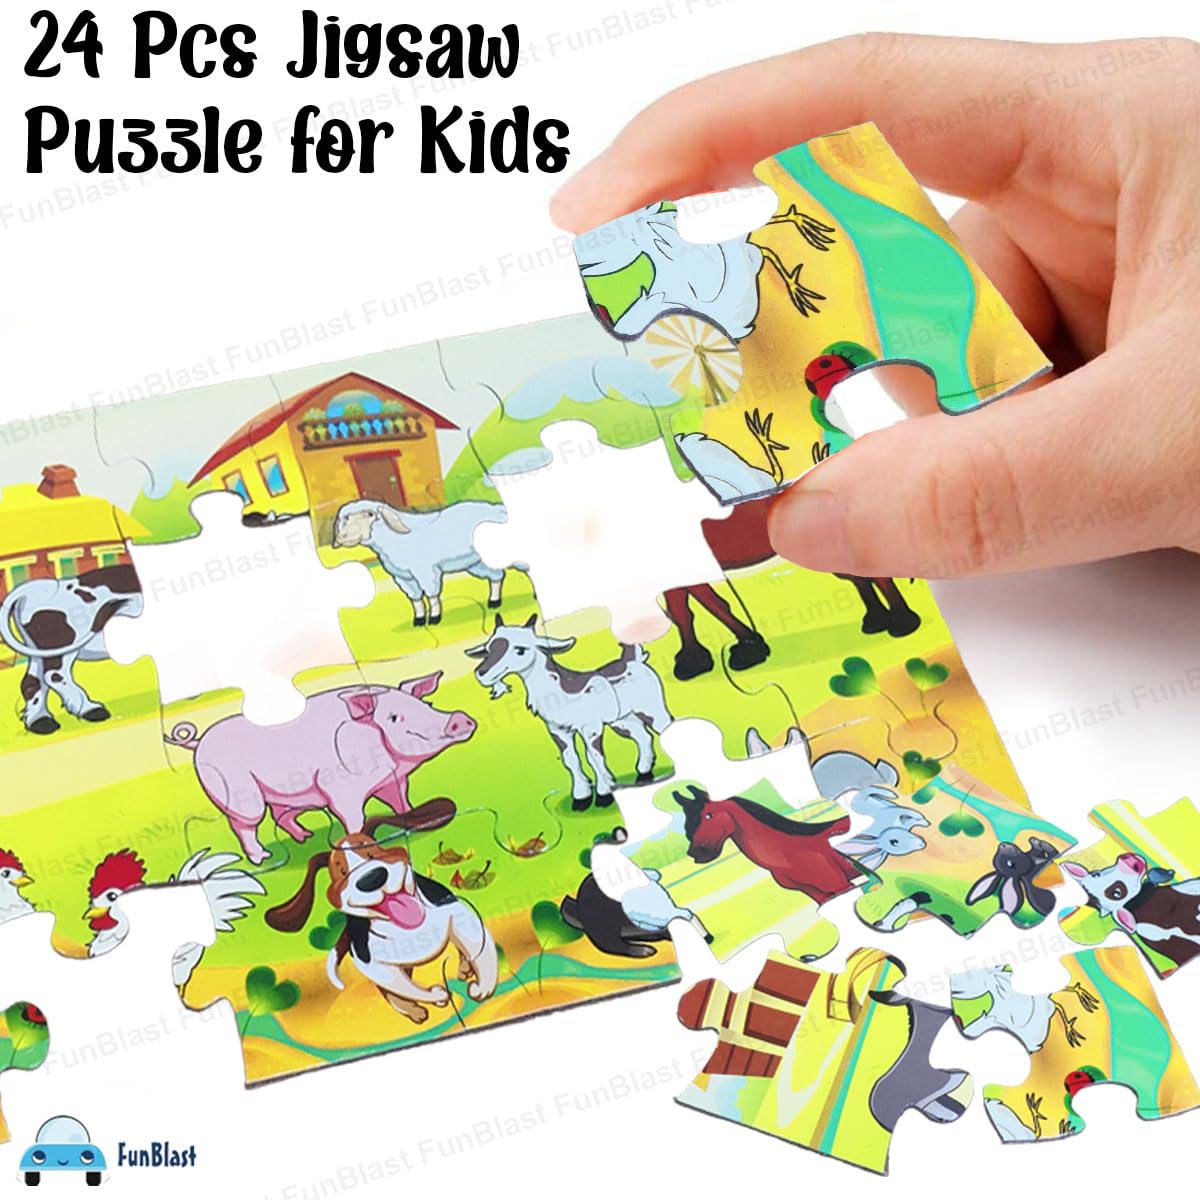 Pet Animal Jigsaw Puzzle for Kids Jigsaw Puzzle for Kids of Age 3-5 Years – 24 Pcs (Size 30X22 cm)